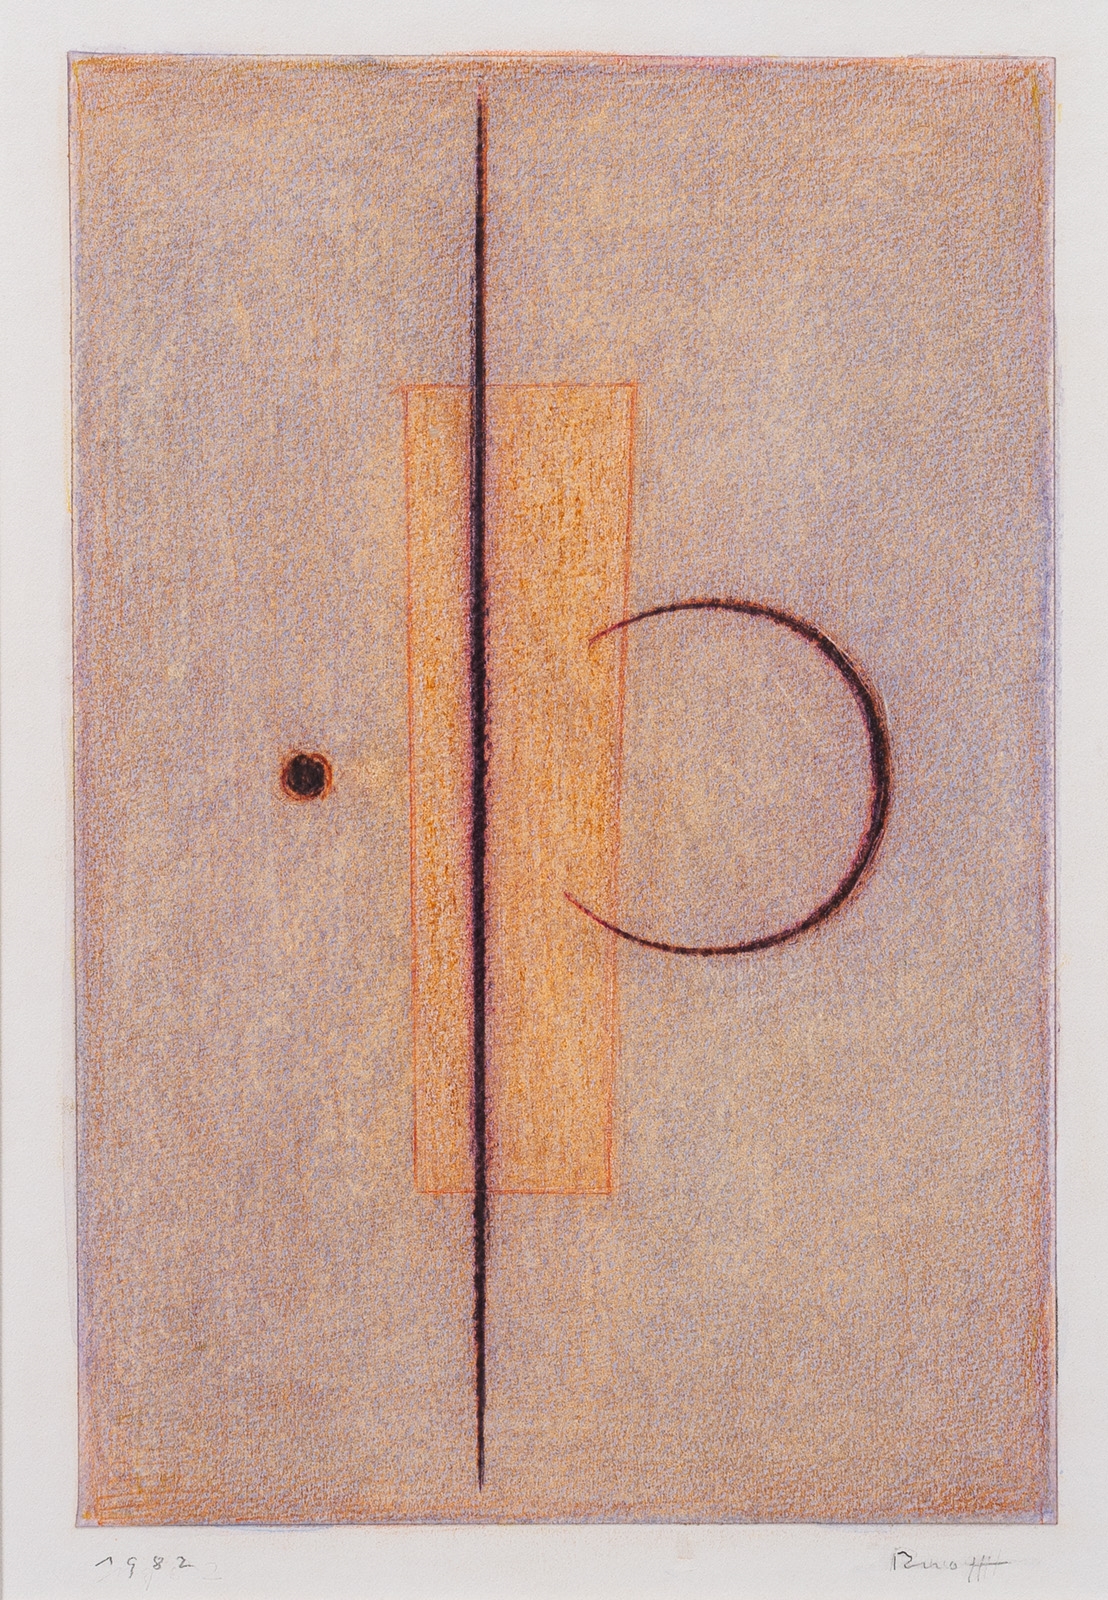 Composition with circle and line by Fritz Ruoff, 1982